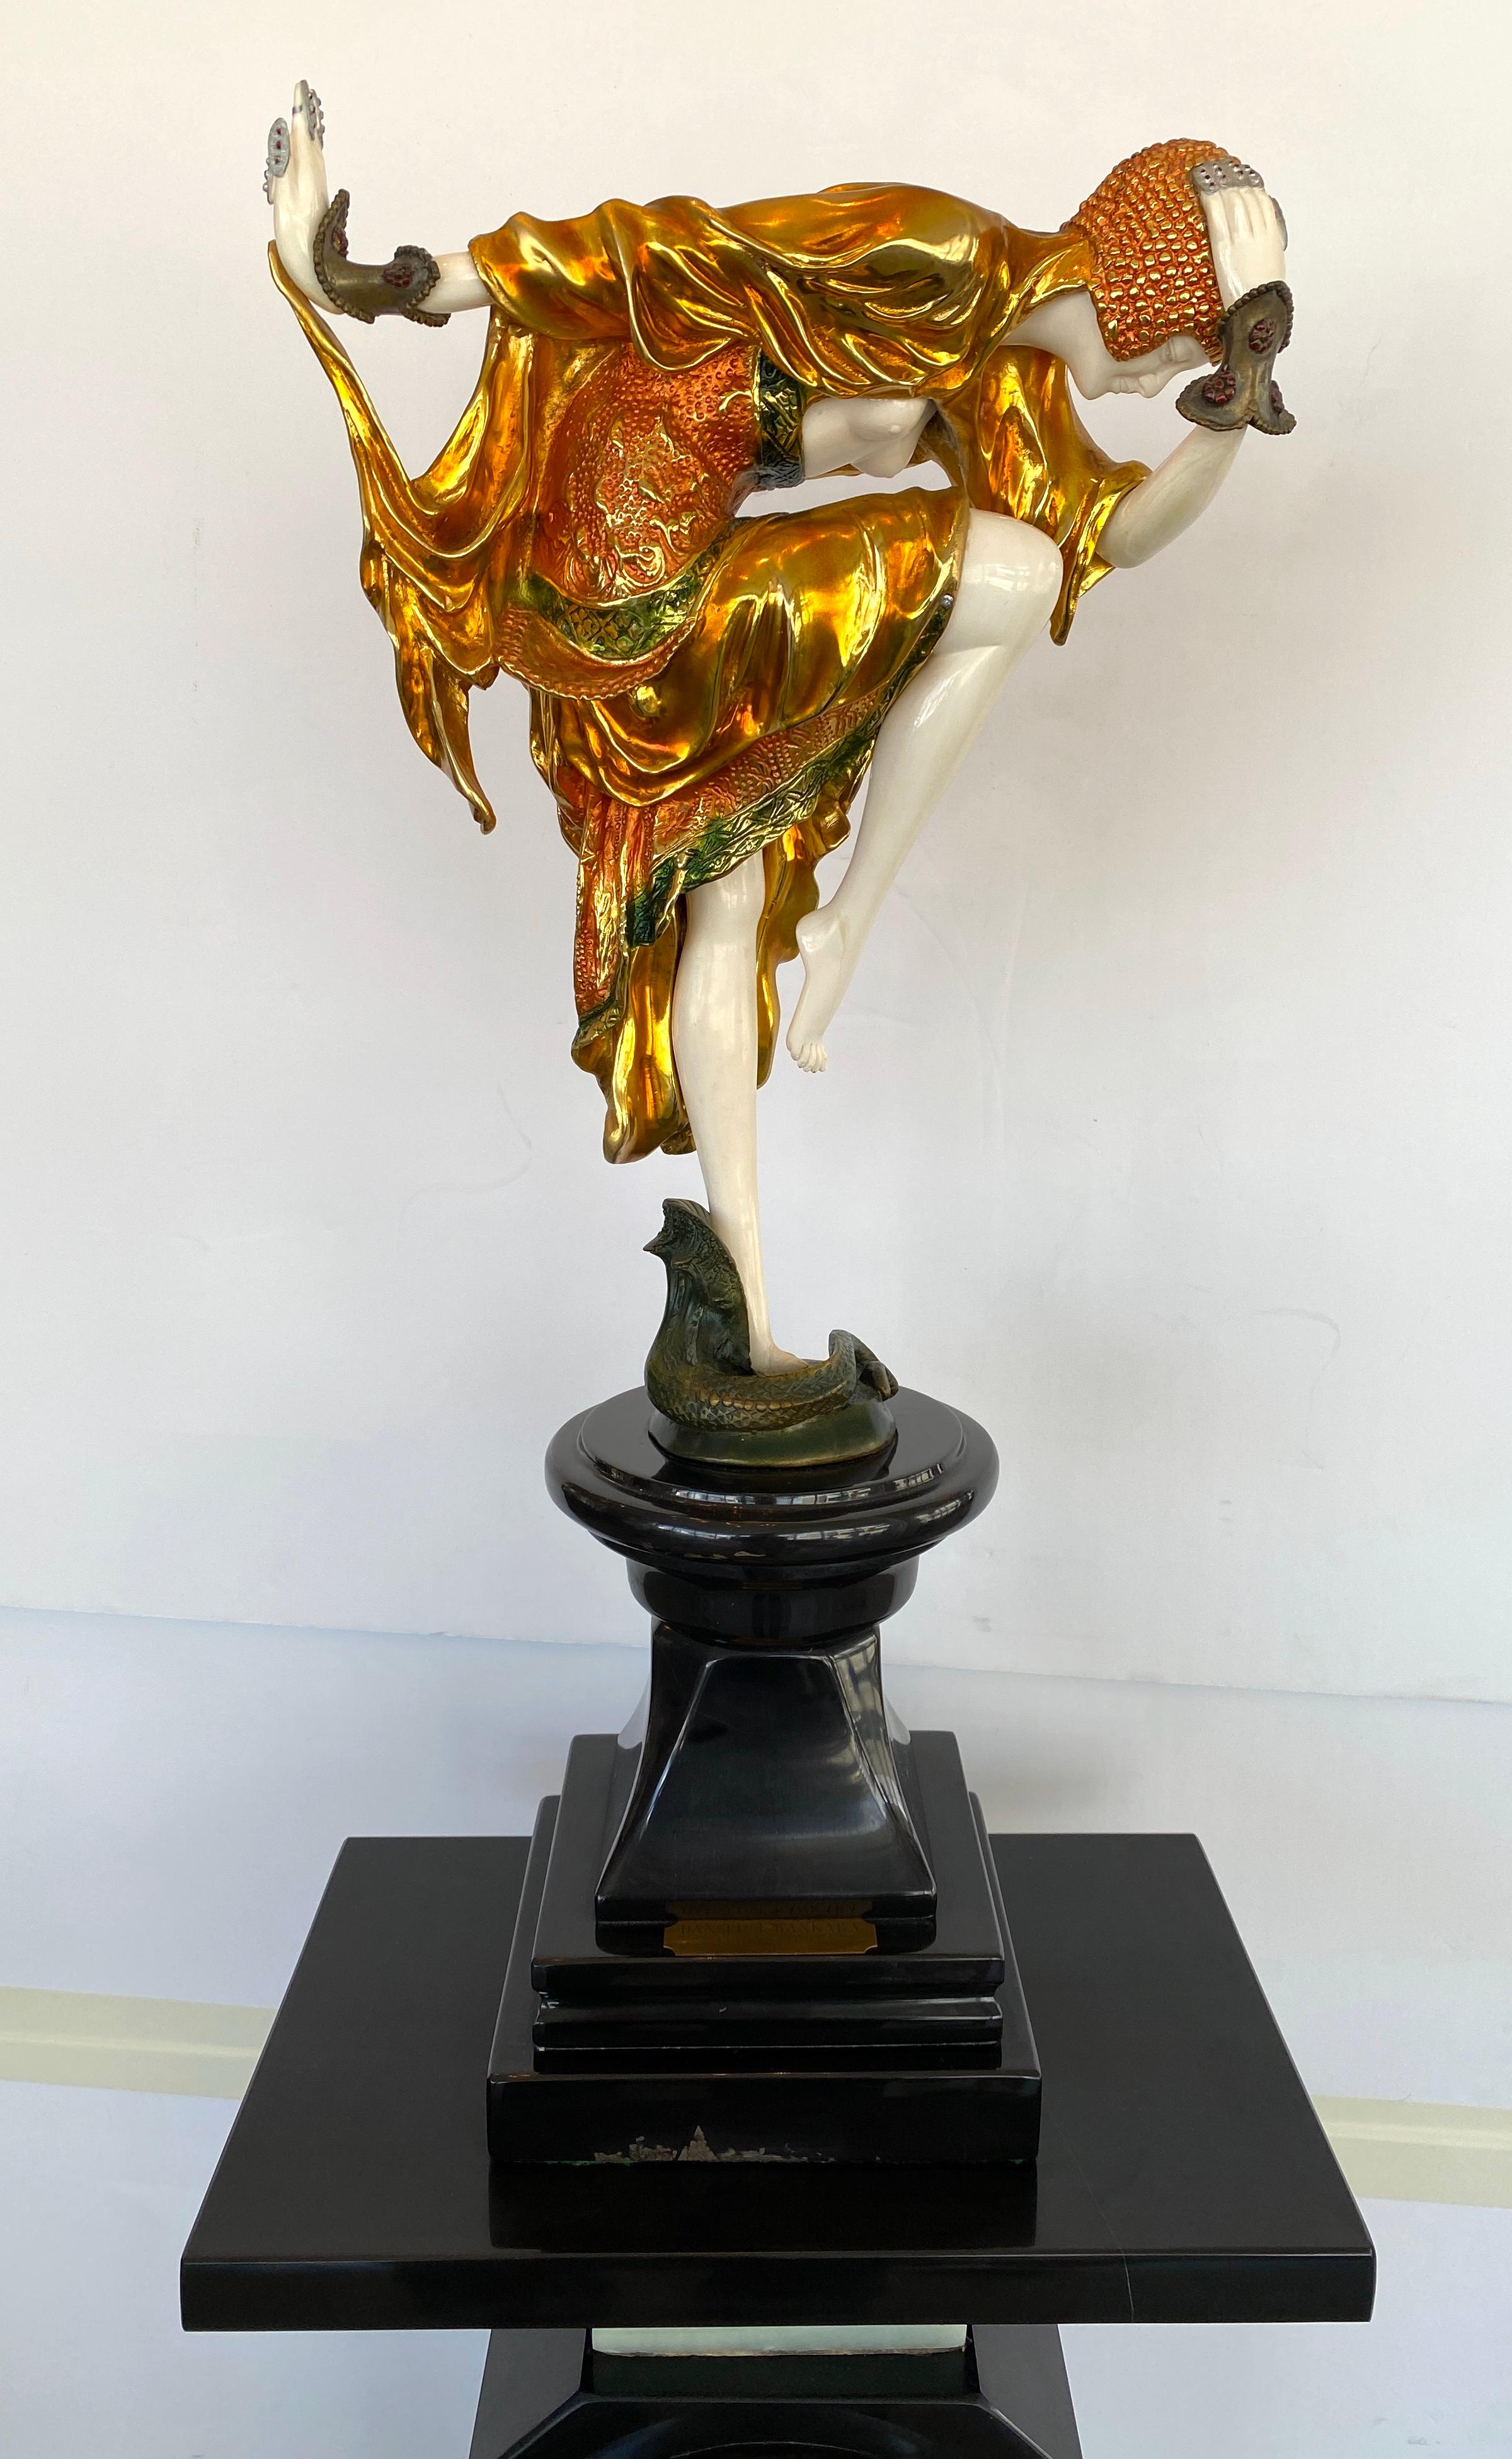 This stylish and chic Art Deco style sculpture is after the Snake Dancer sculpture by the Romanian-born sculptor Demtre Chiparus, which was originaly created in 1925.

The piece is finished in a polychrome, patinated coloration.
 
Note: Overall